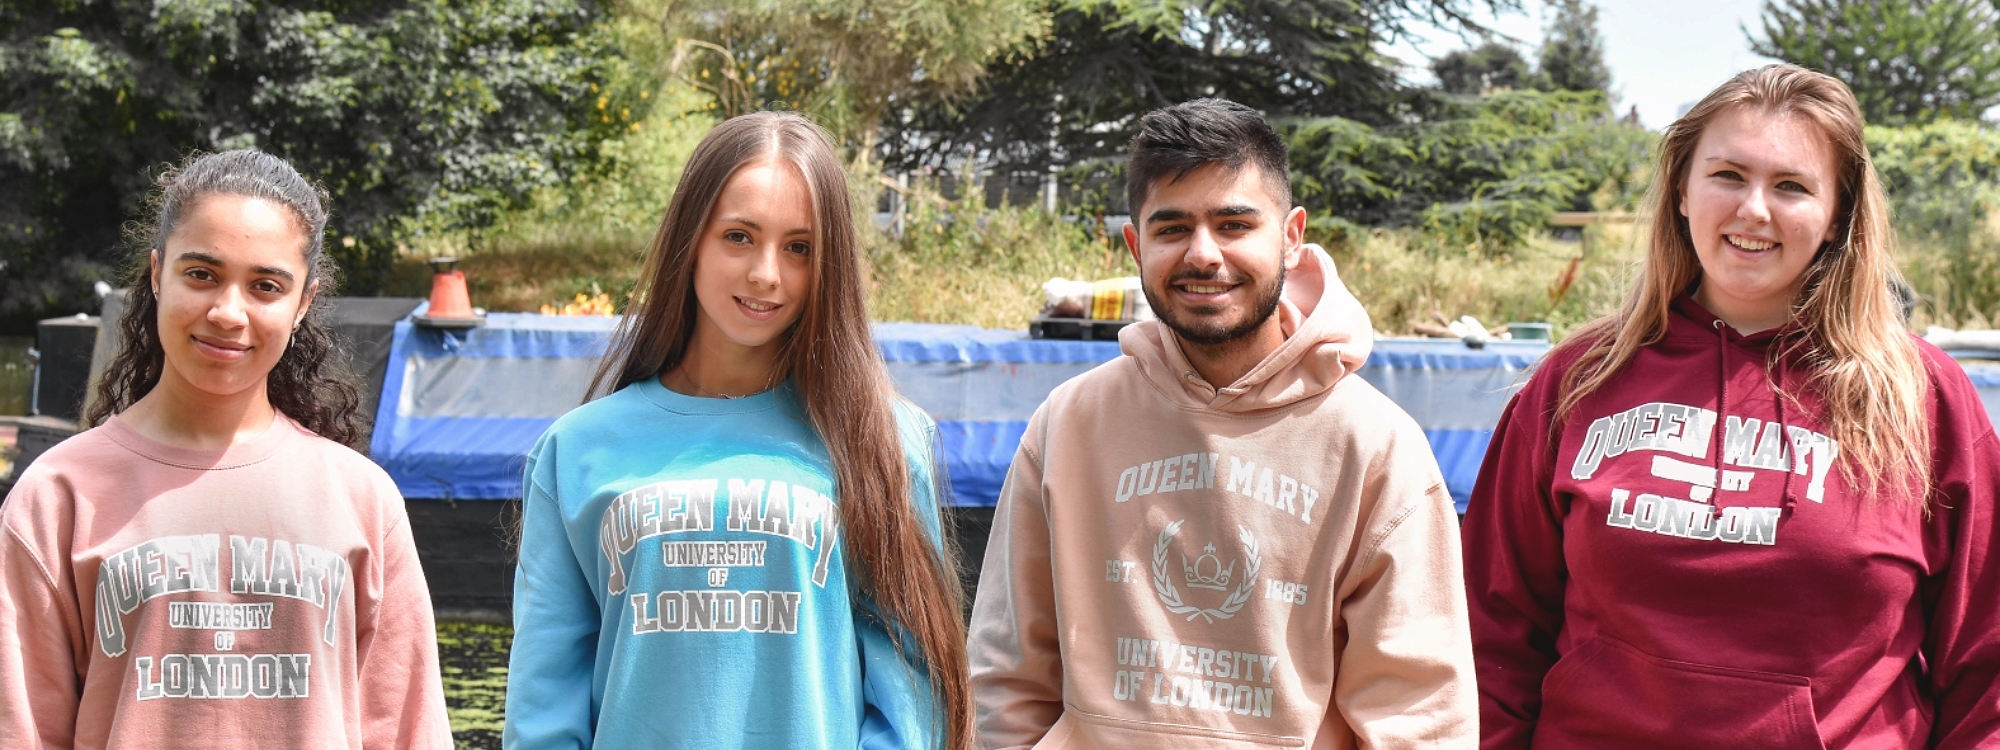 Our online shop offers a great selection of official Queen Mary branded clothing, gifts and merchandise. You can click and collect on-campus or have it delivered directly to you!